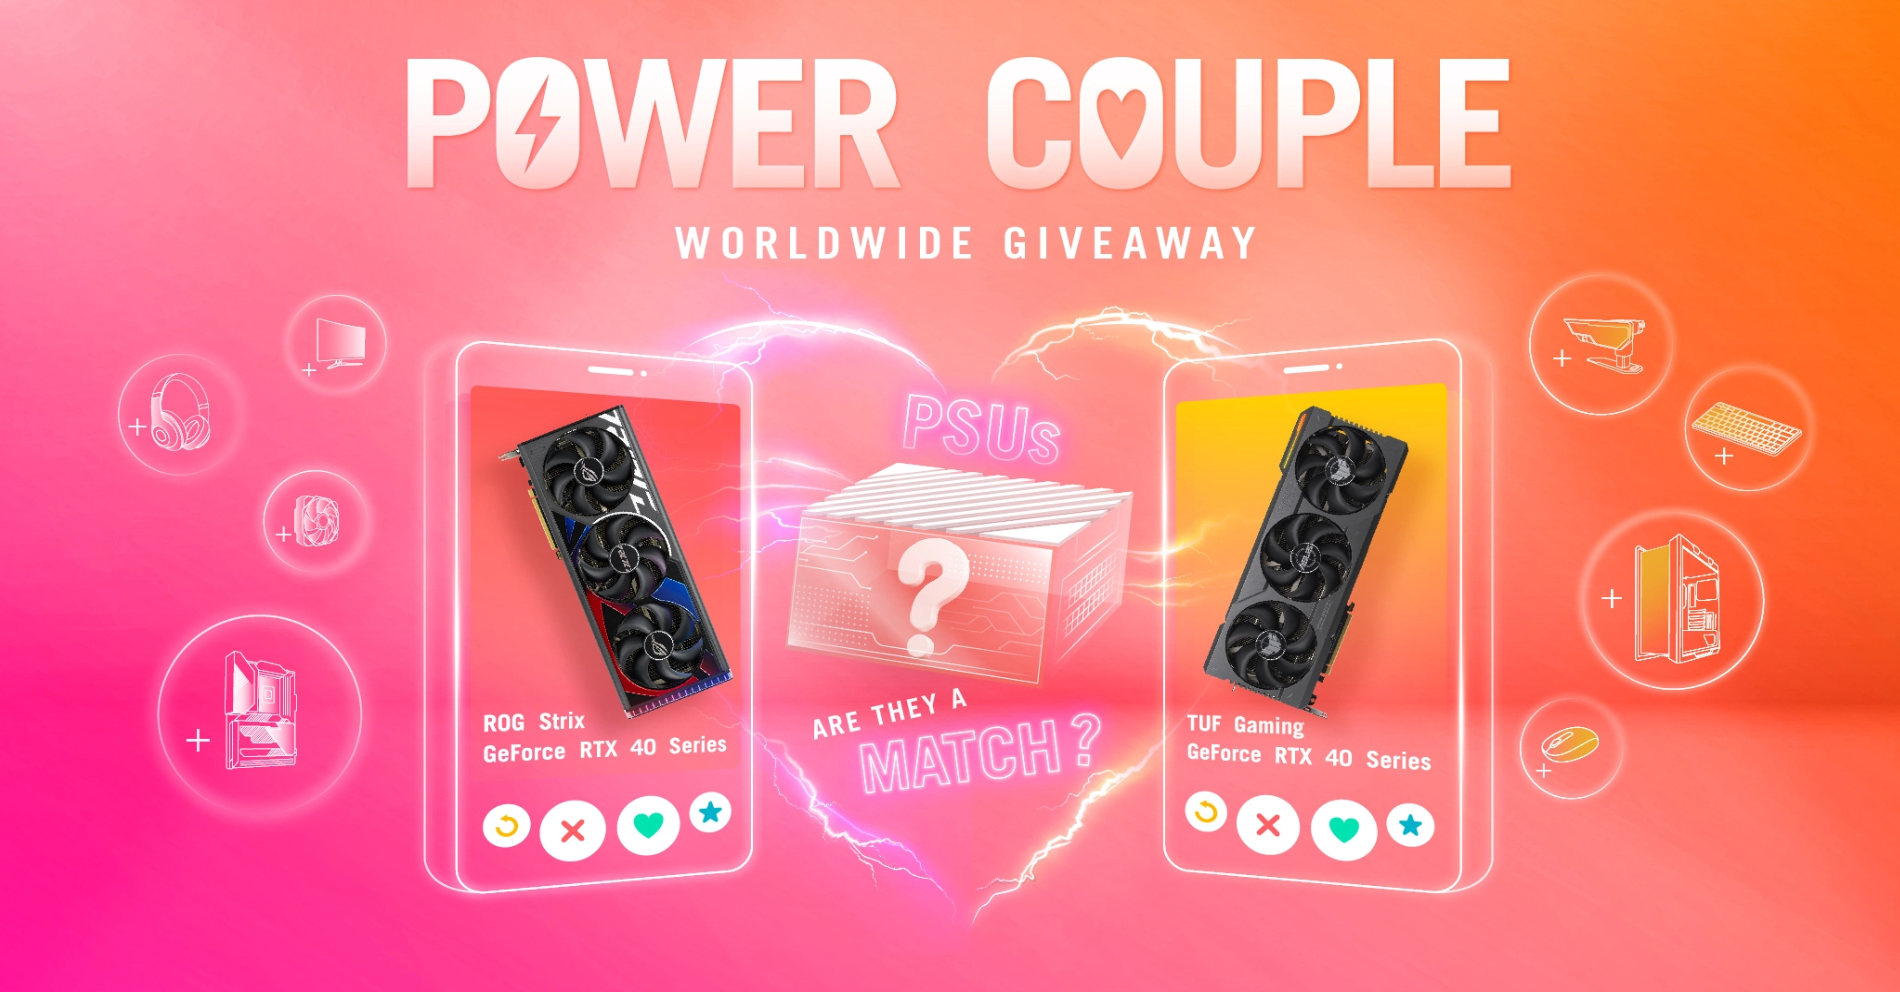 ASUS Hosts "Power Couple" Worldwide Giveaway With GPU & PSU Prizes